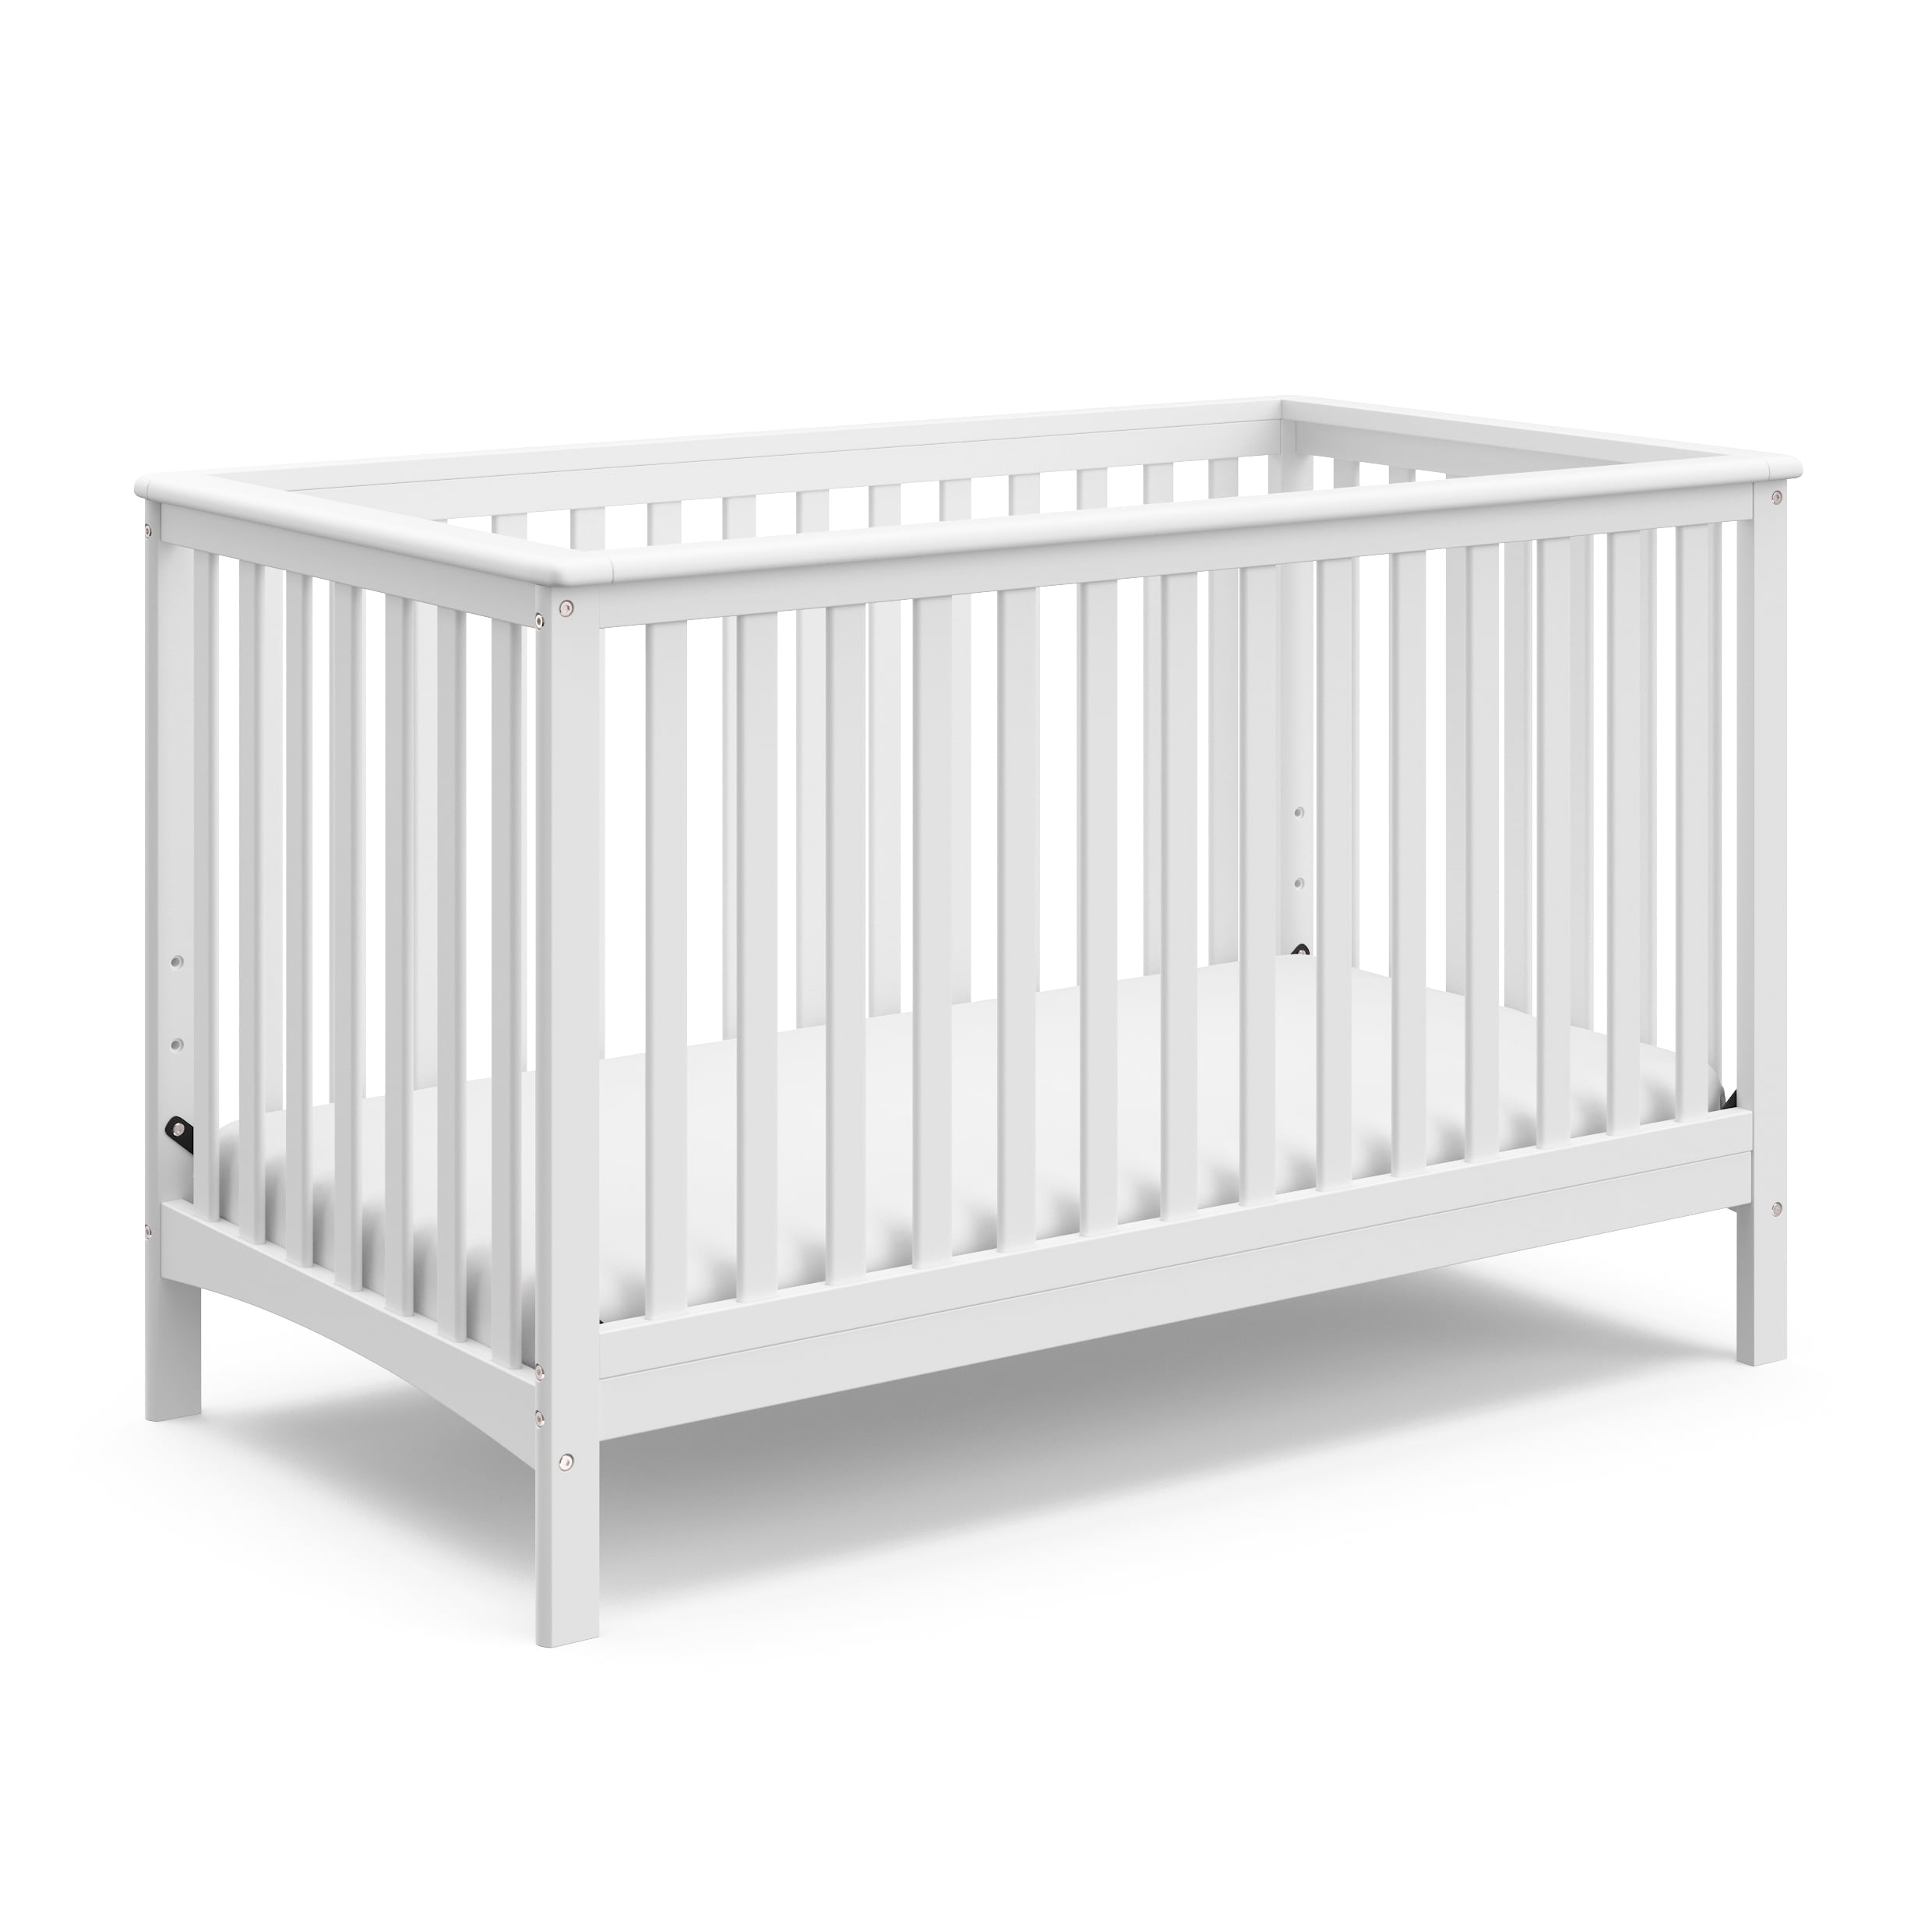 Photo 1 of **DAMAGED** Storkcraft Hillcrest 4 in 1 Convertible Crib White